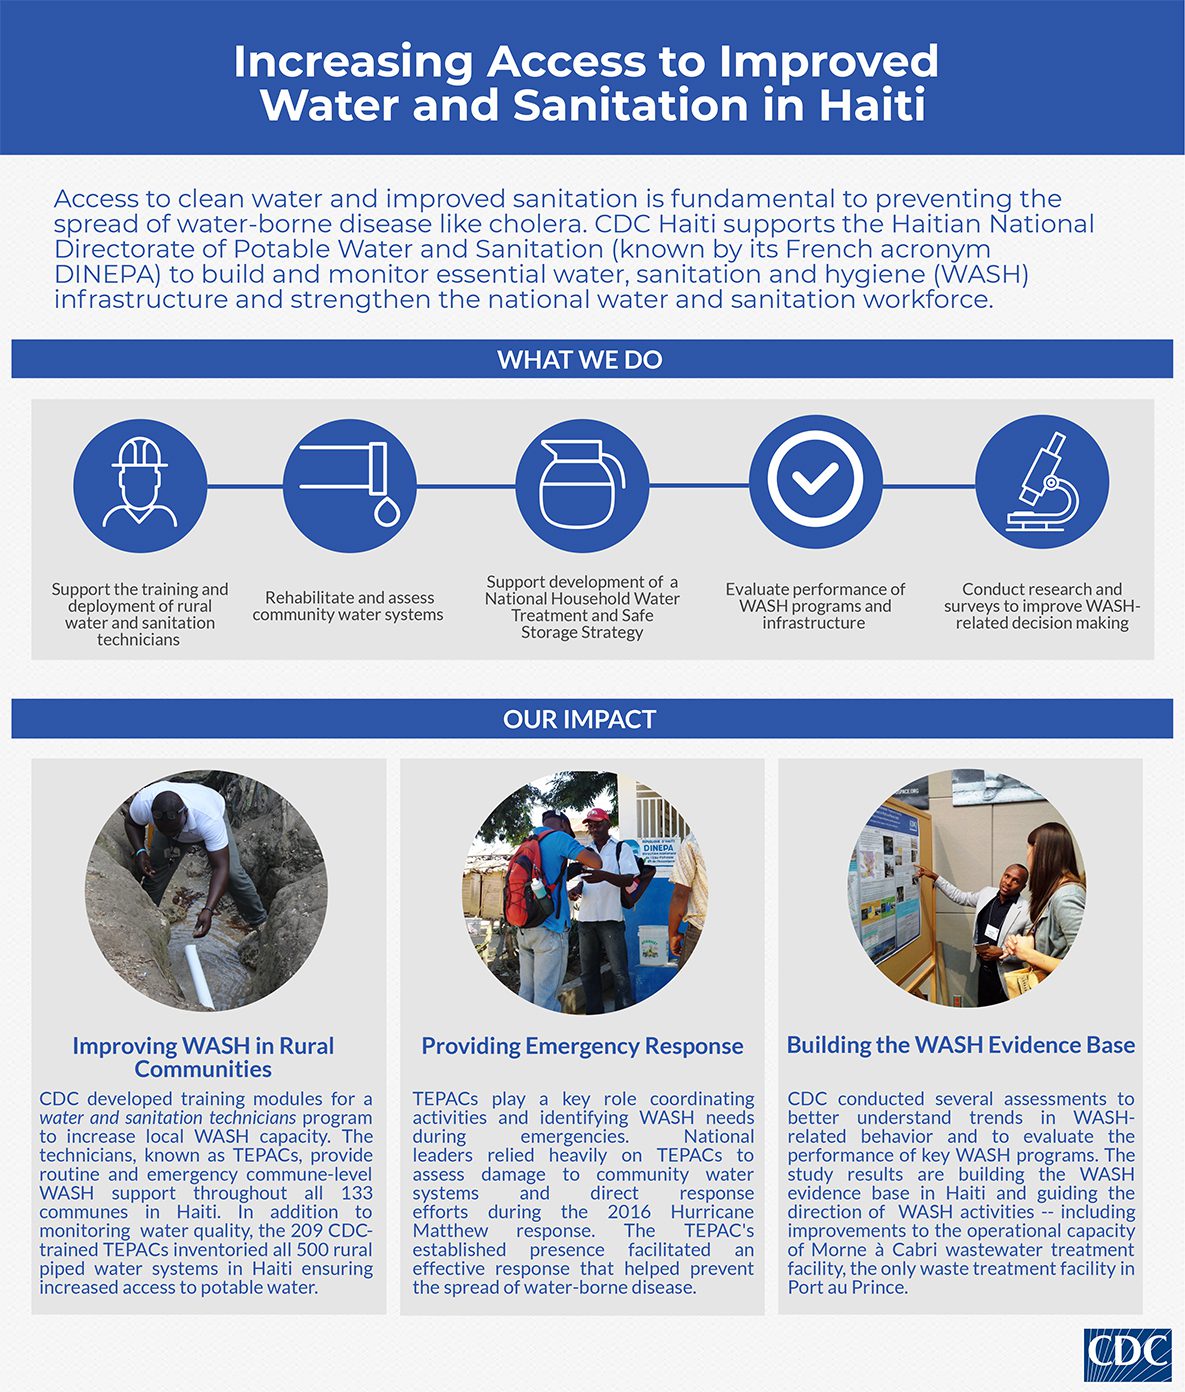 Increasing access to improved water and sanitation in Haiti